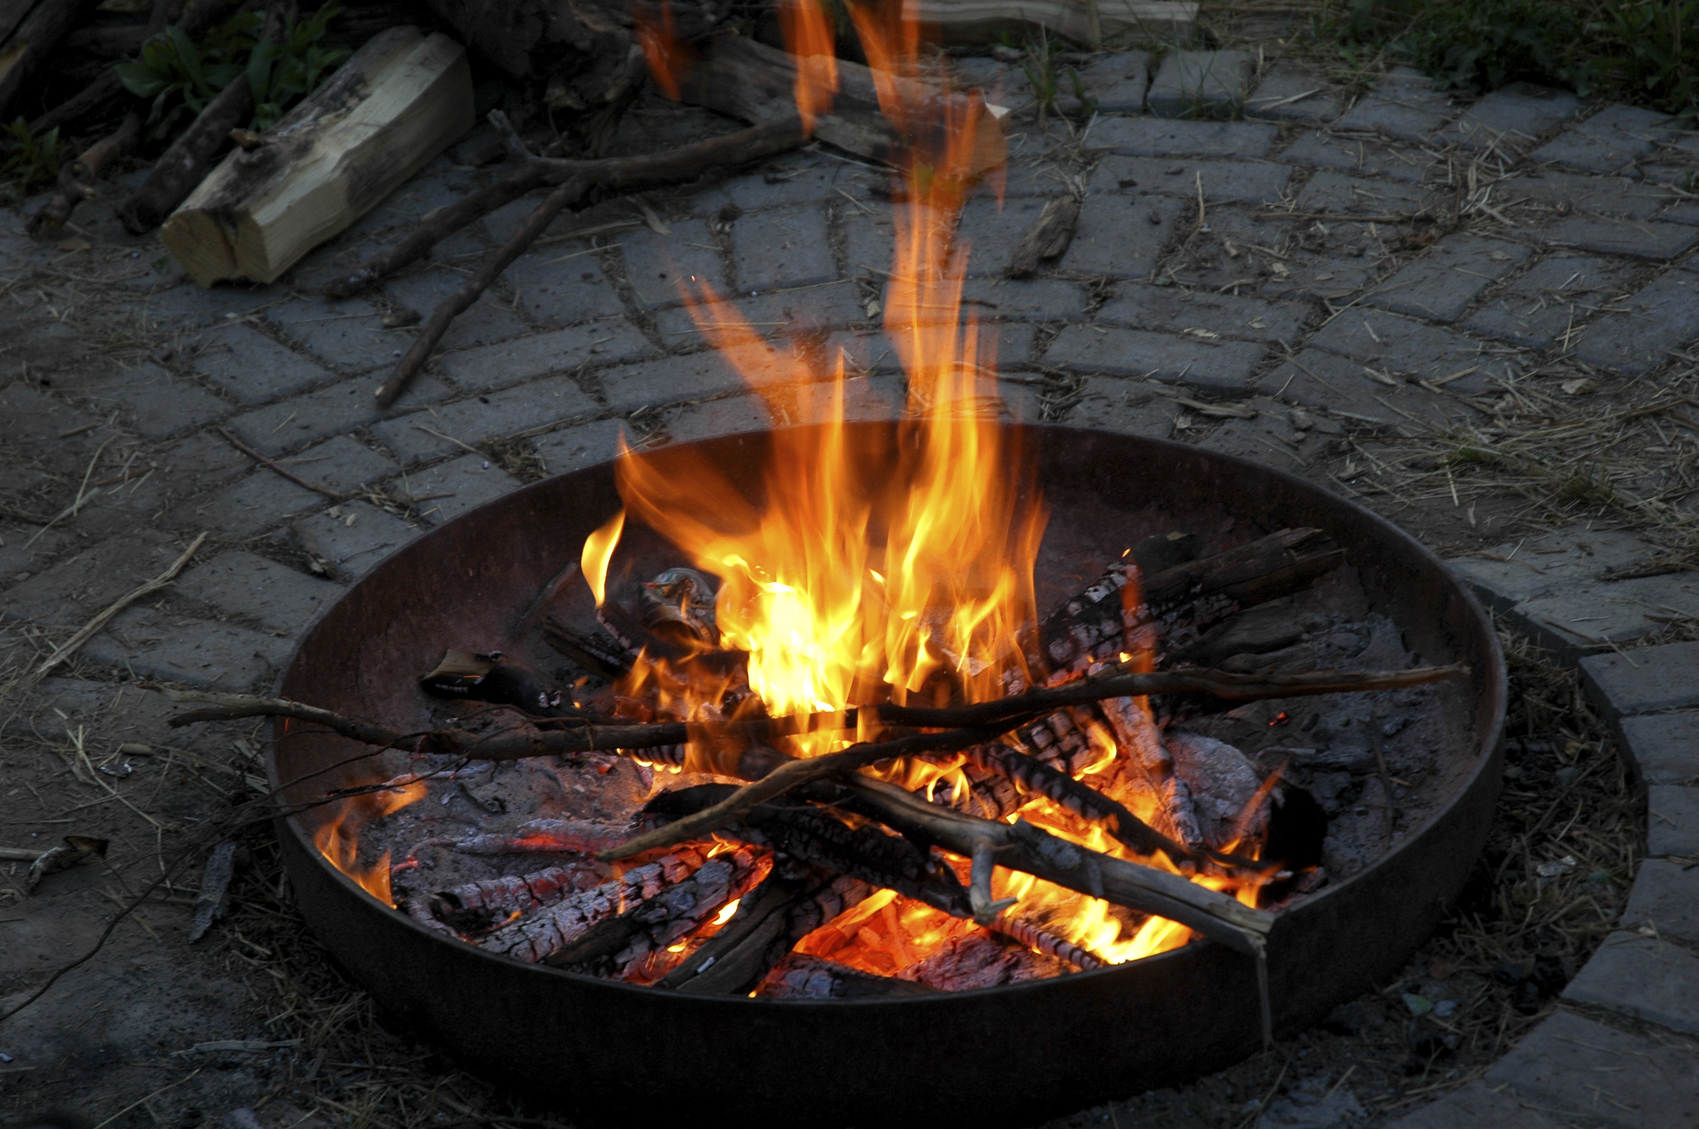 Are backyard fire pits legal in NYC?